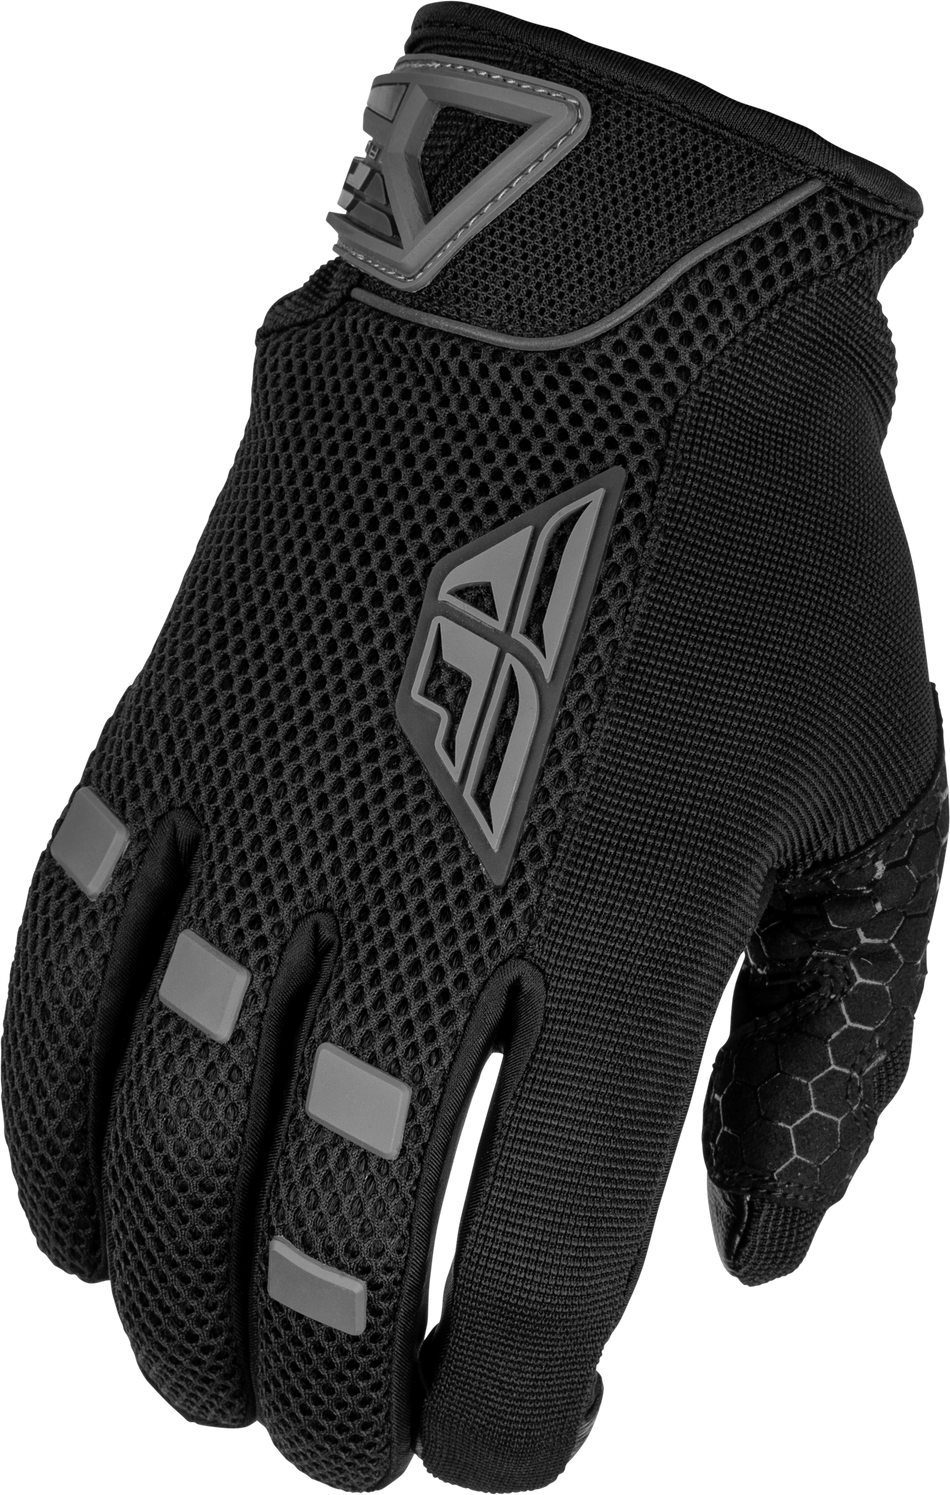 FLY RACING Women's Coolpro Gloves Black 3x 476-62143X